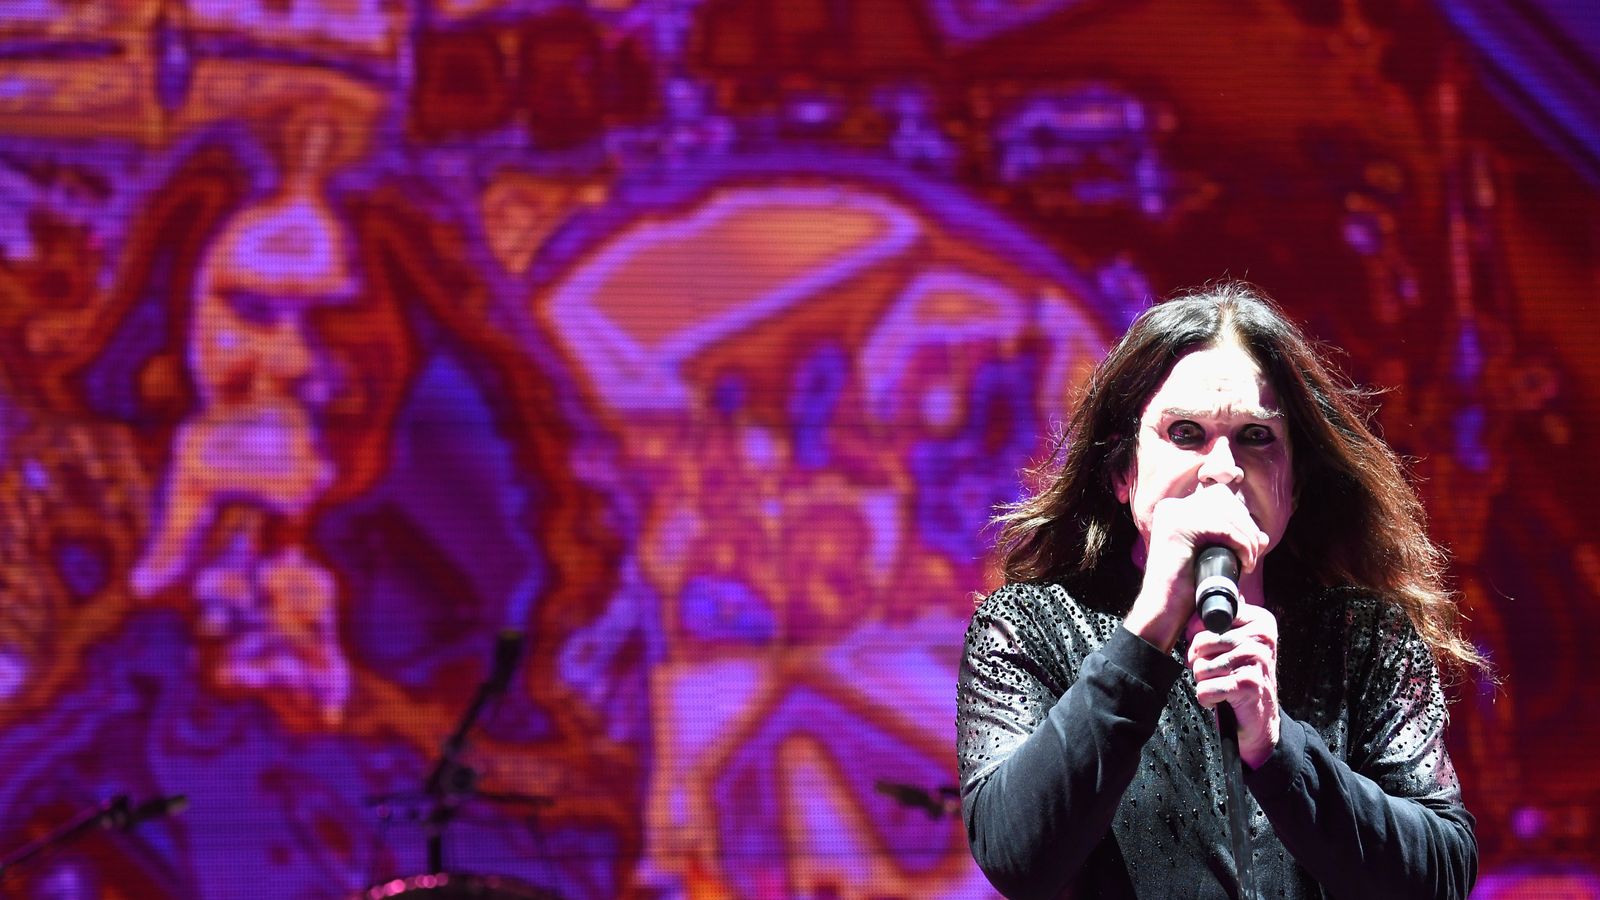 Ozzy Osbourne announces new gigs after cancelling tour | Ents & Arts News | Sky News